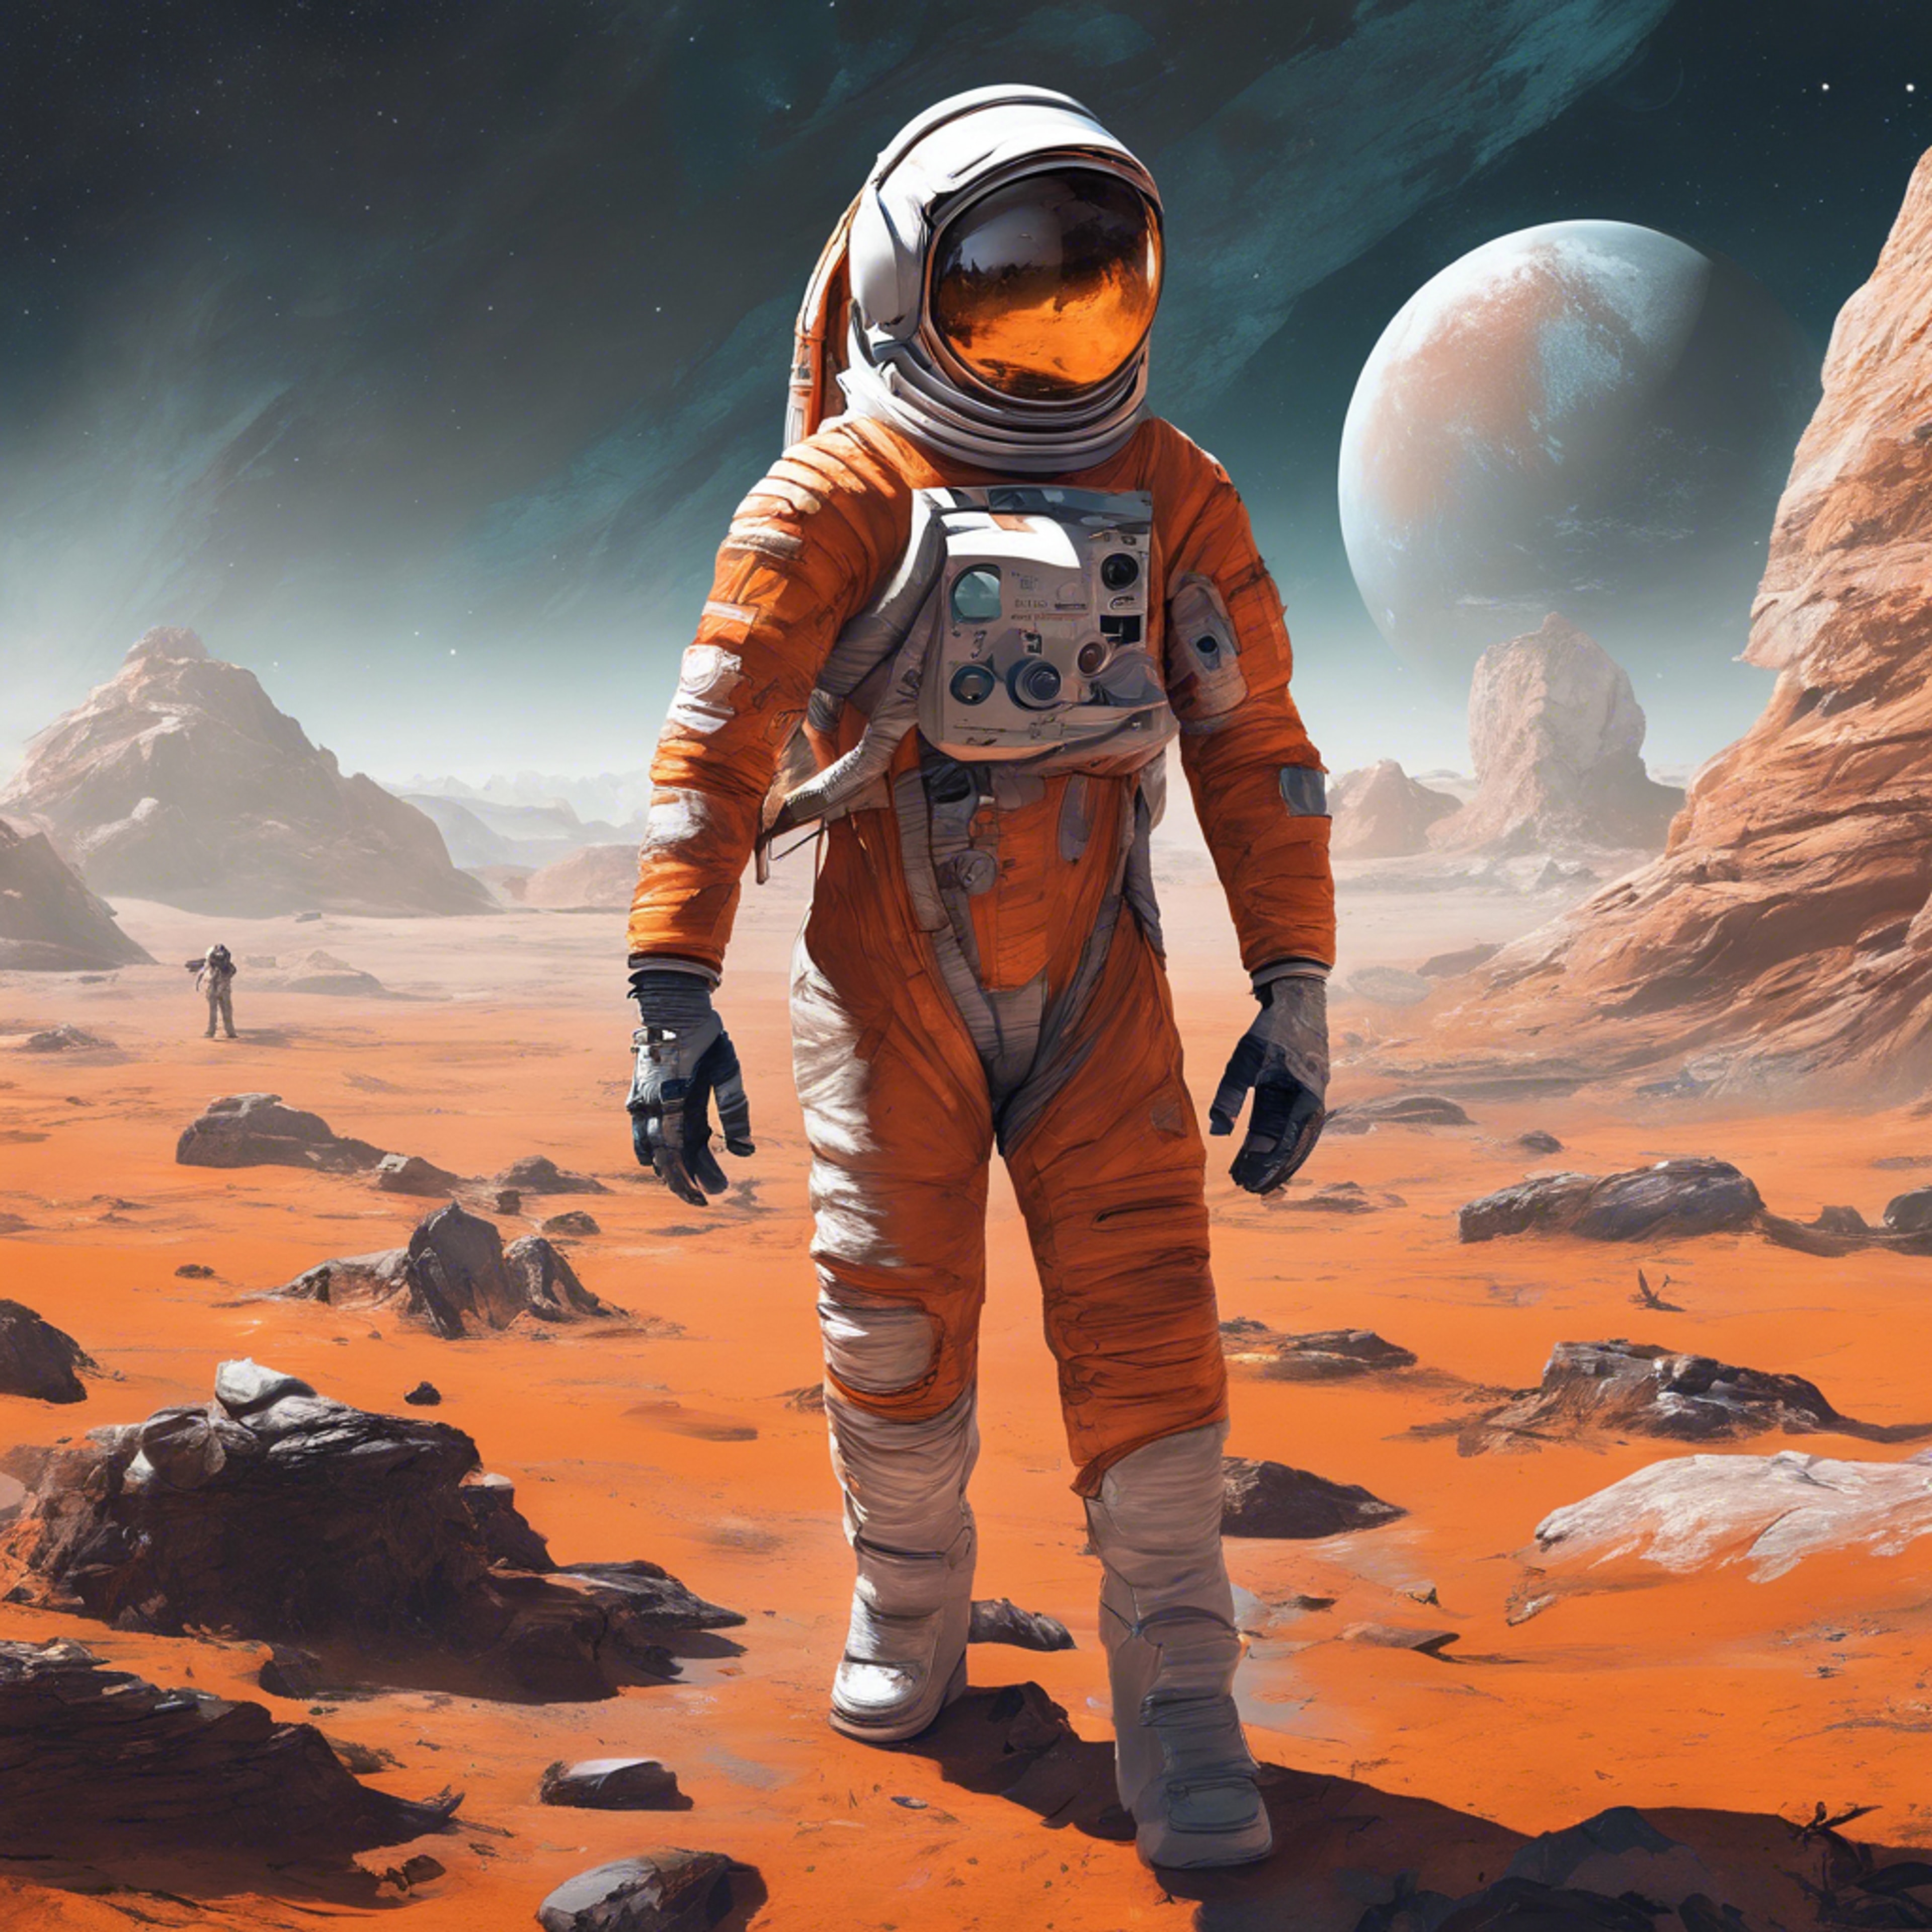 A space-themed video game featuring an astronaut in an orange and white suit exploring an alien planet. Tapéta[5d2c49abc07a4c83ad01]